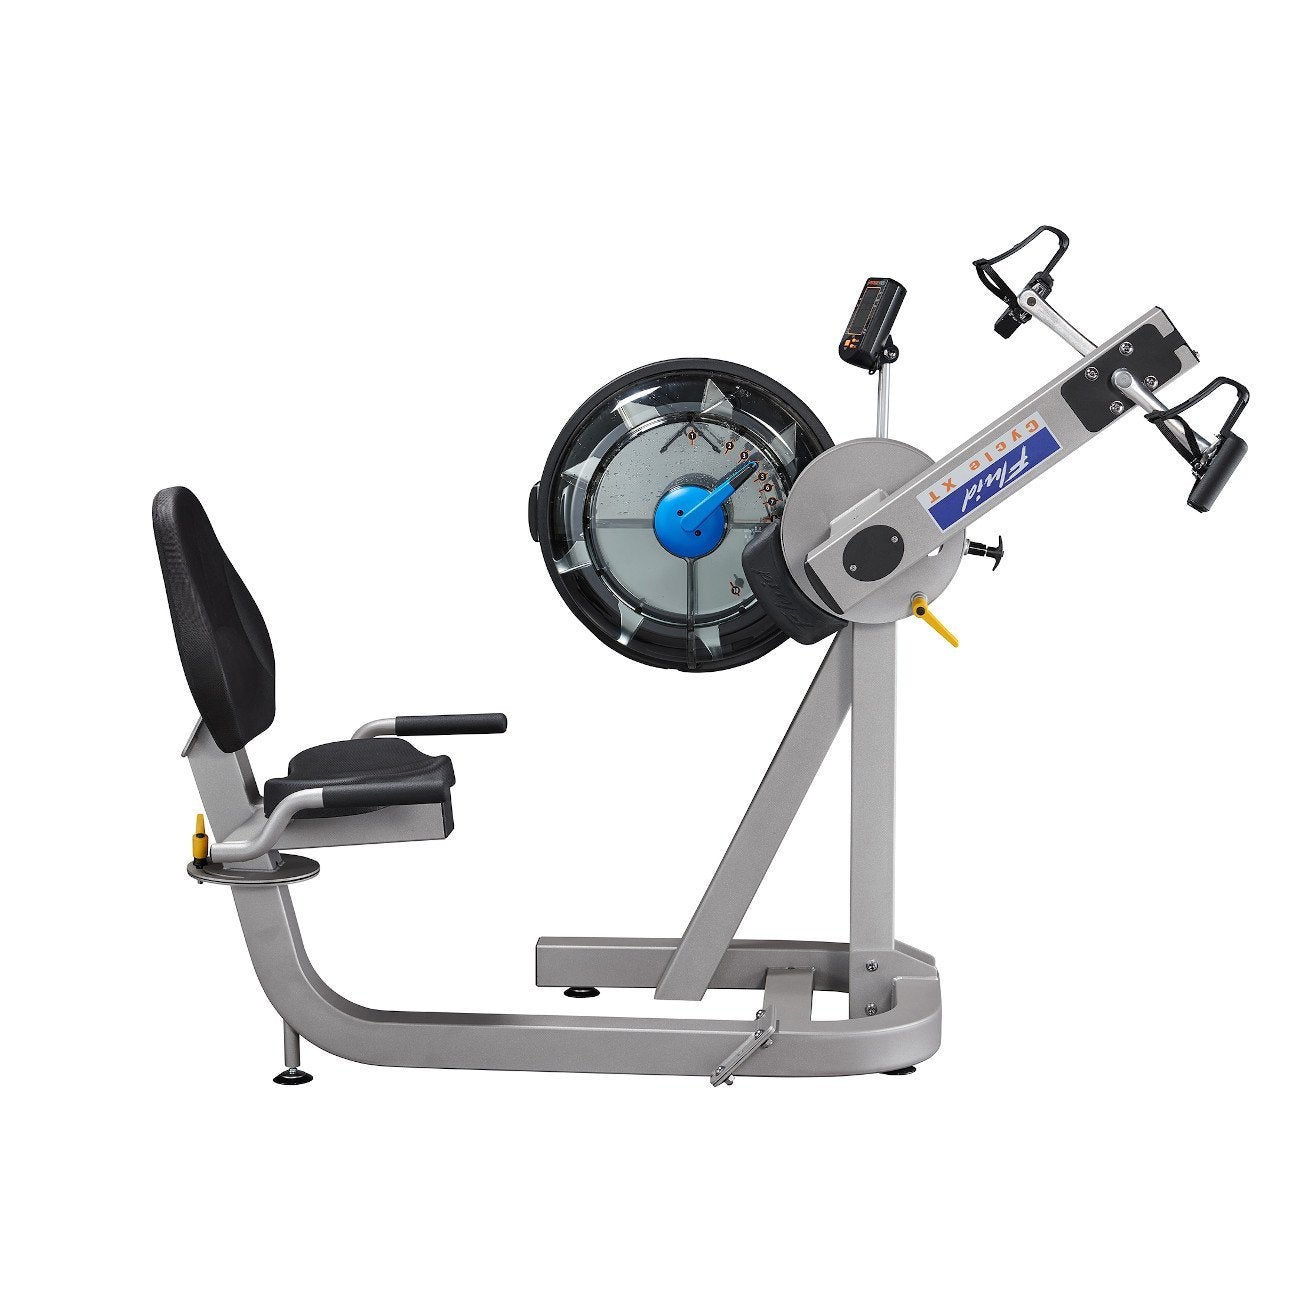 FDF Fluid Exercise E720 Cycle XT Multi-Functional Cross Trainer arm crank in extended position.